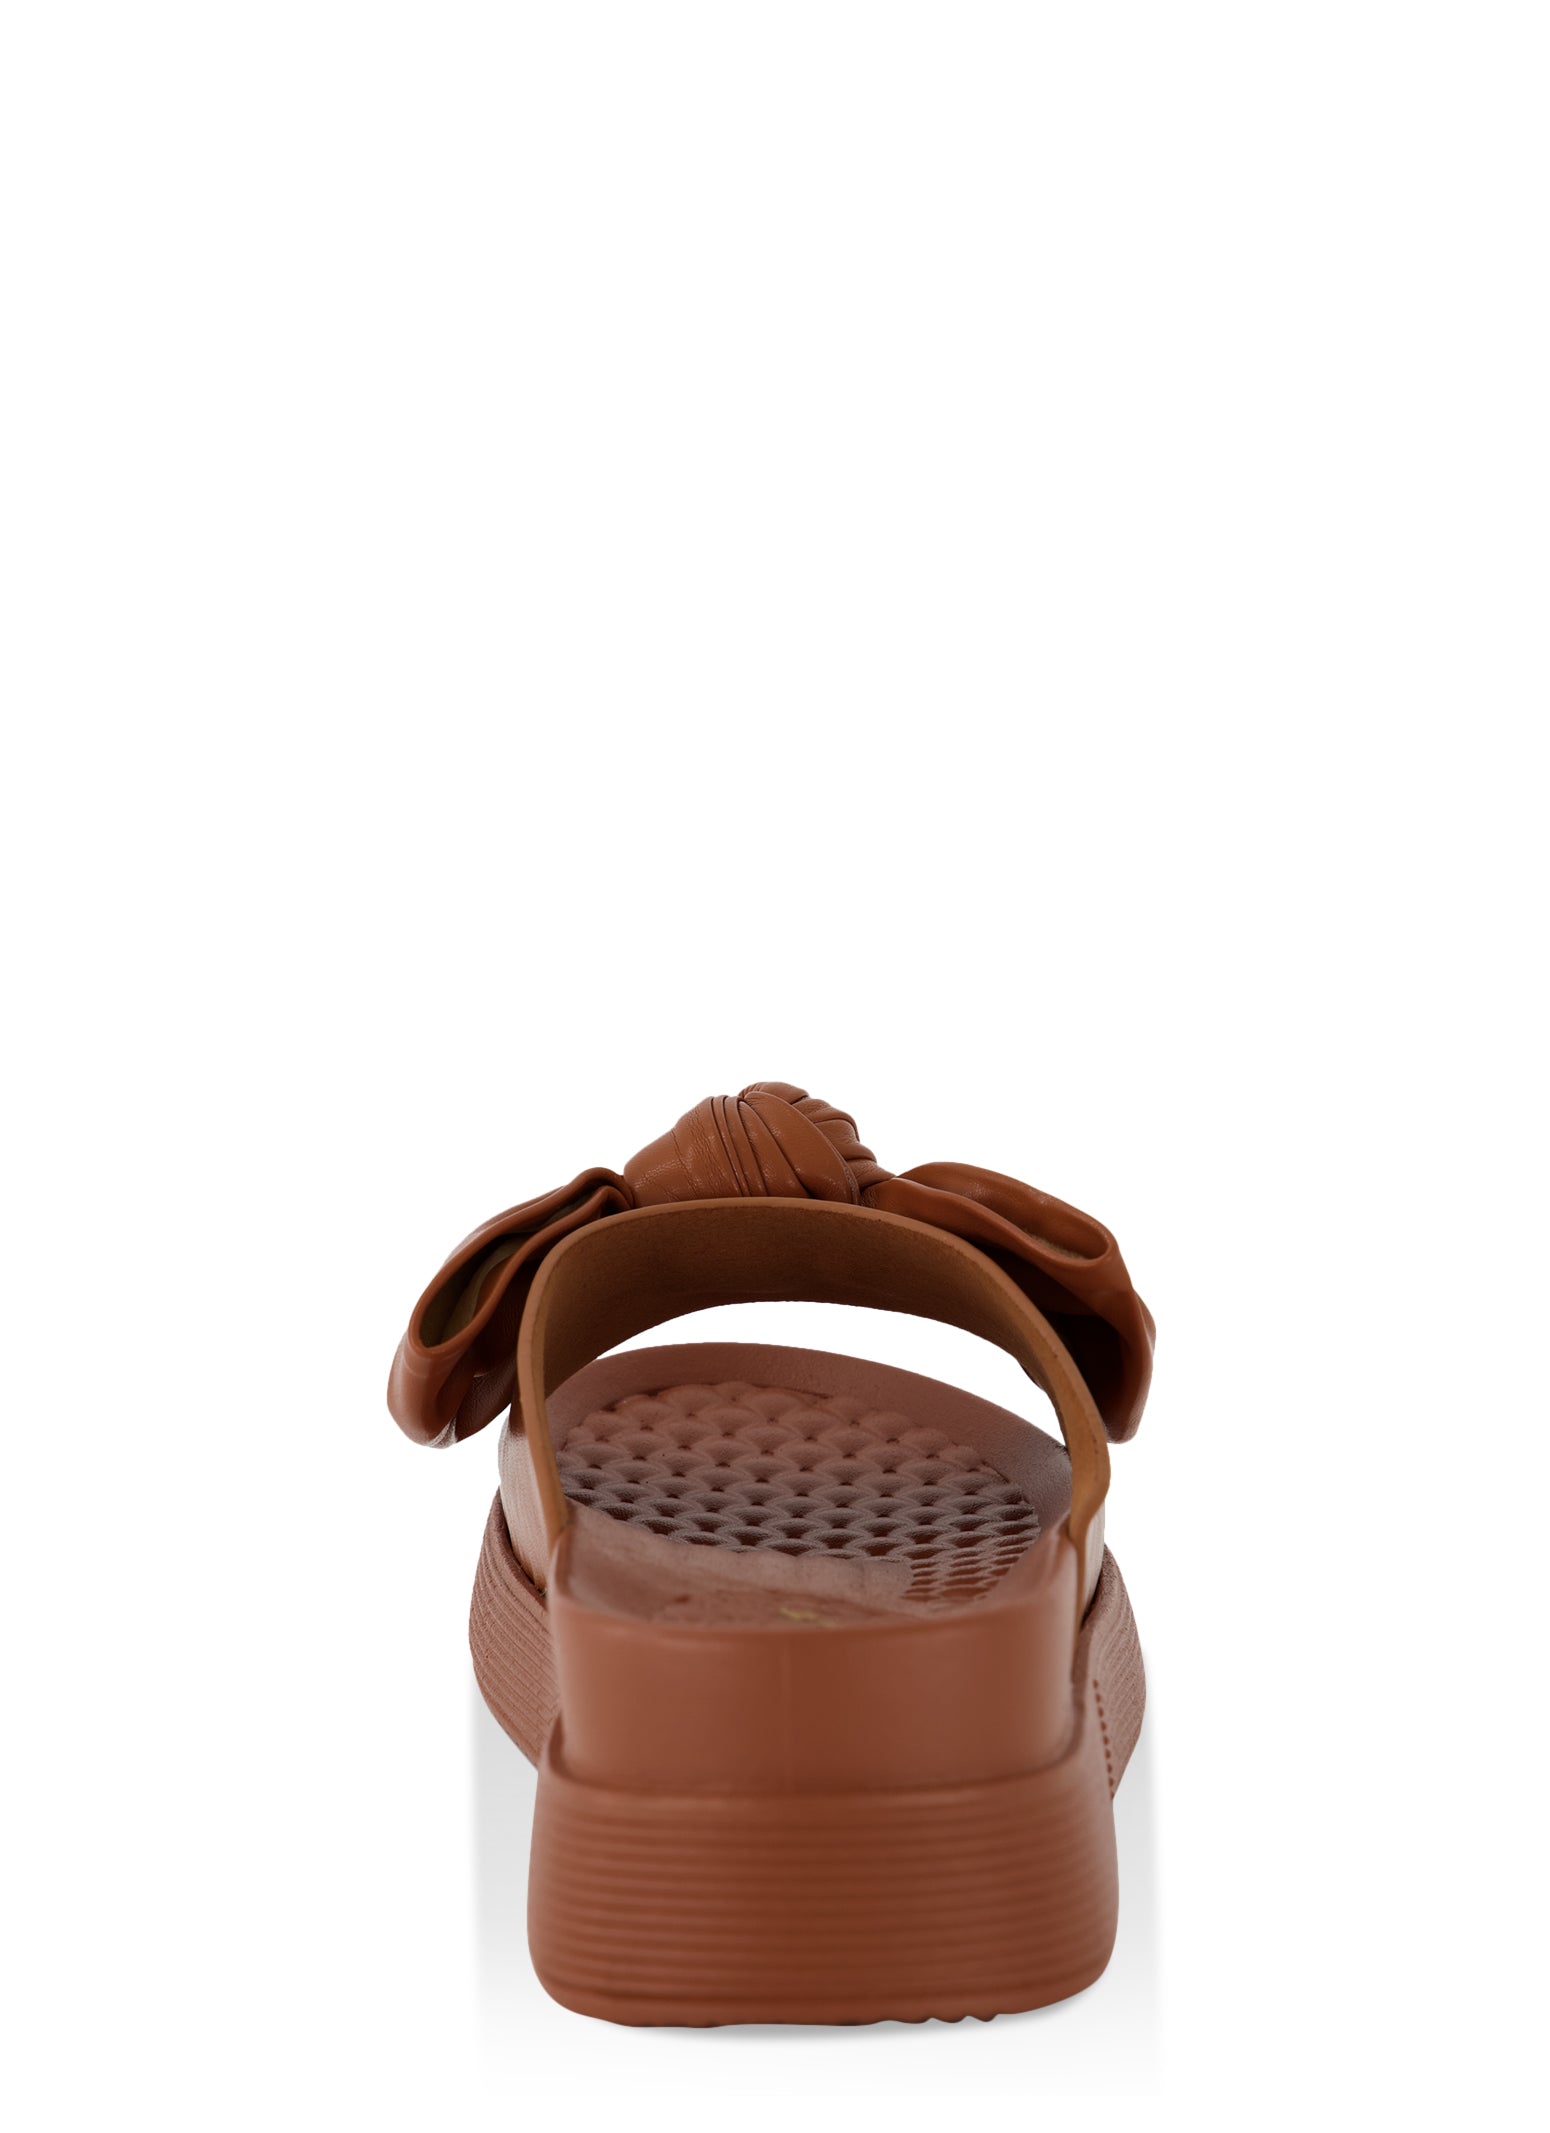 Bow Tie Band Slide Sandals